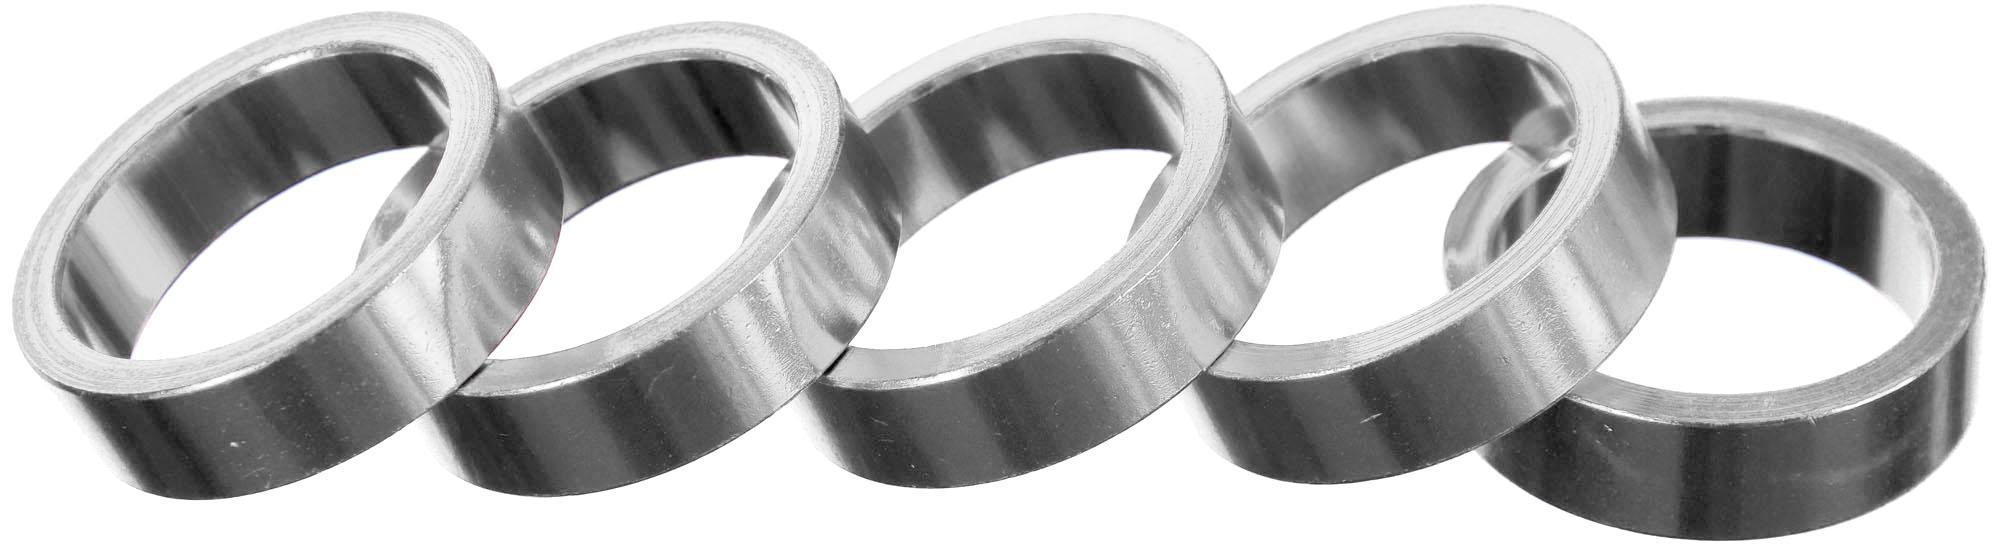 Brand-x Spacer Pack Alloy 5 X 10mm - Silver